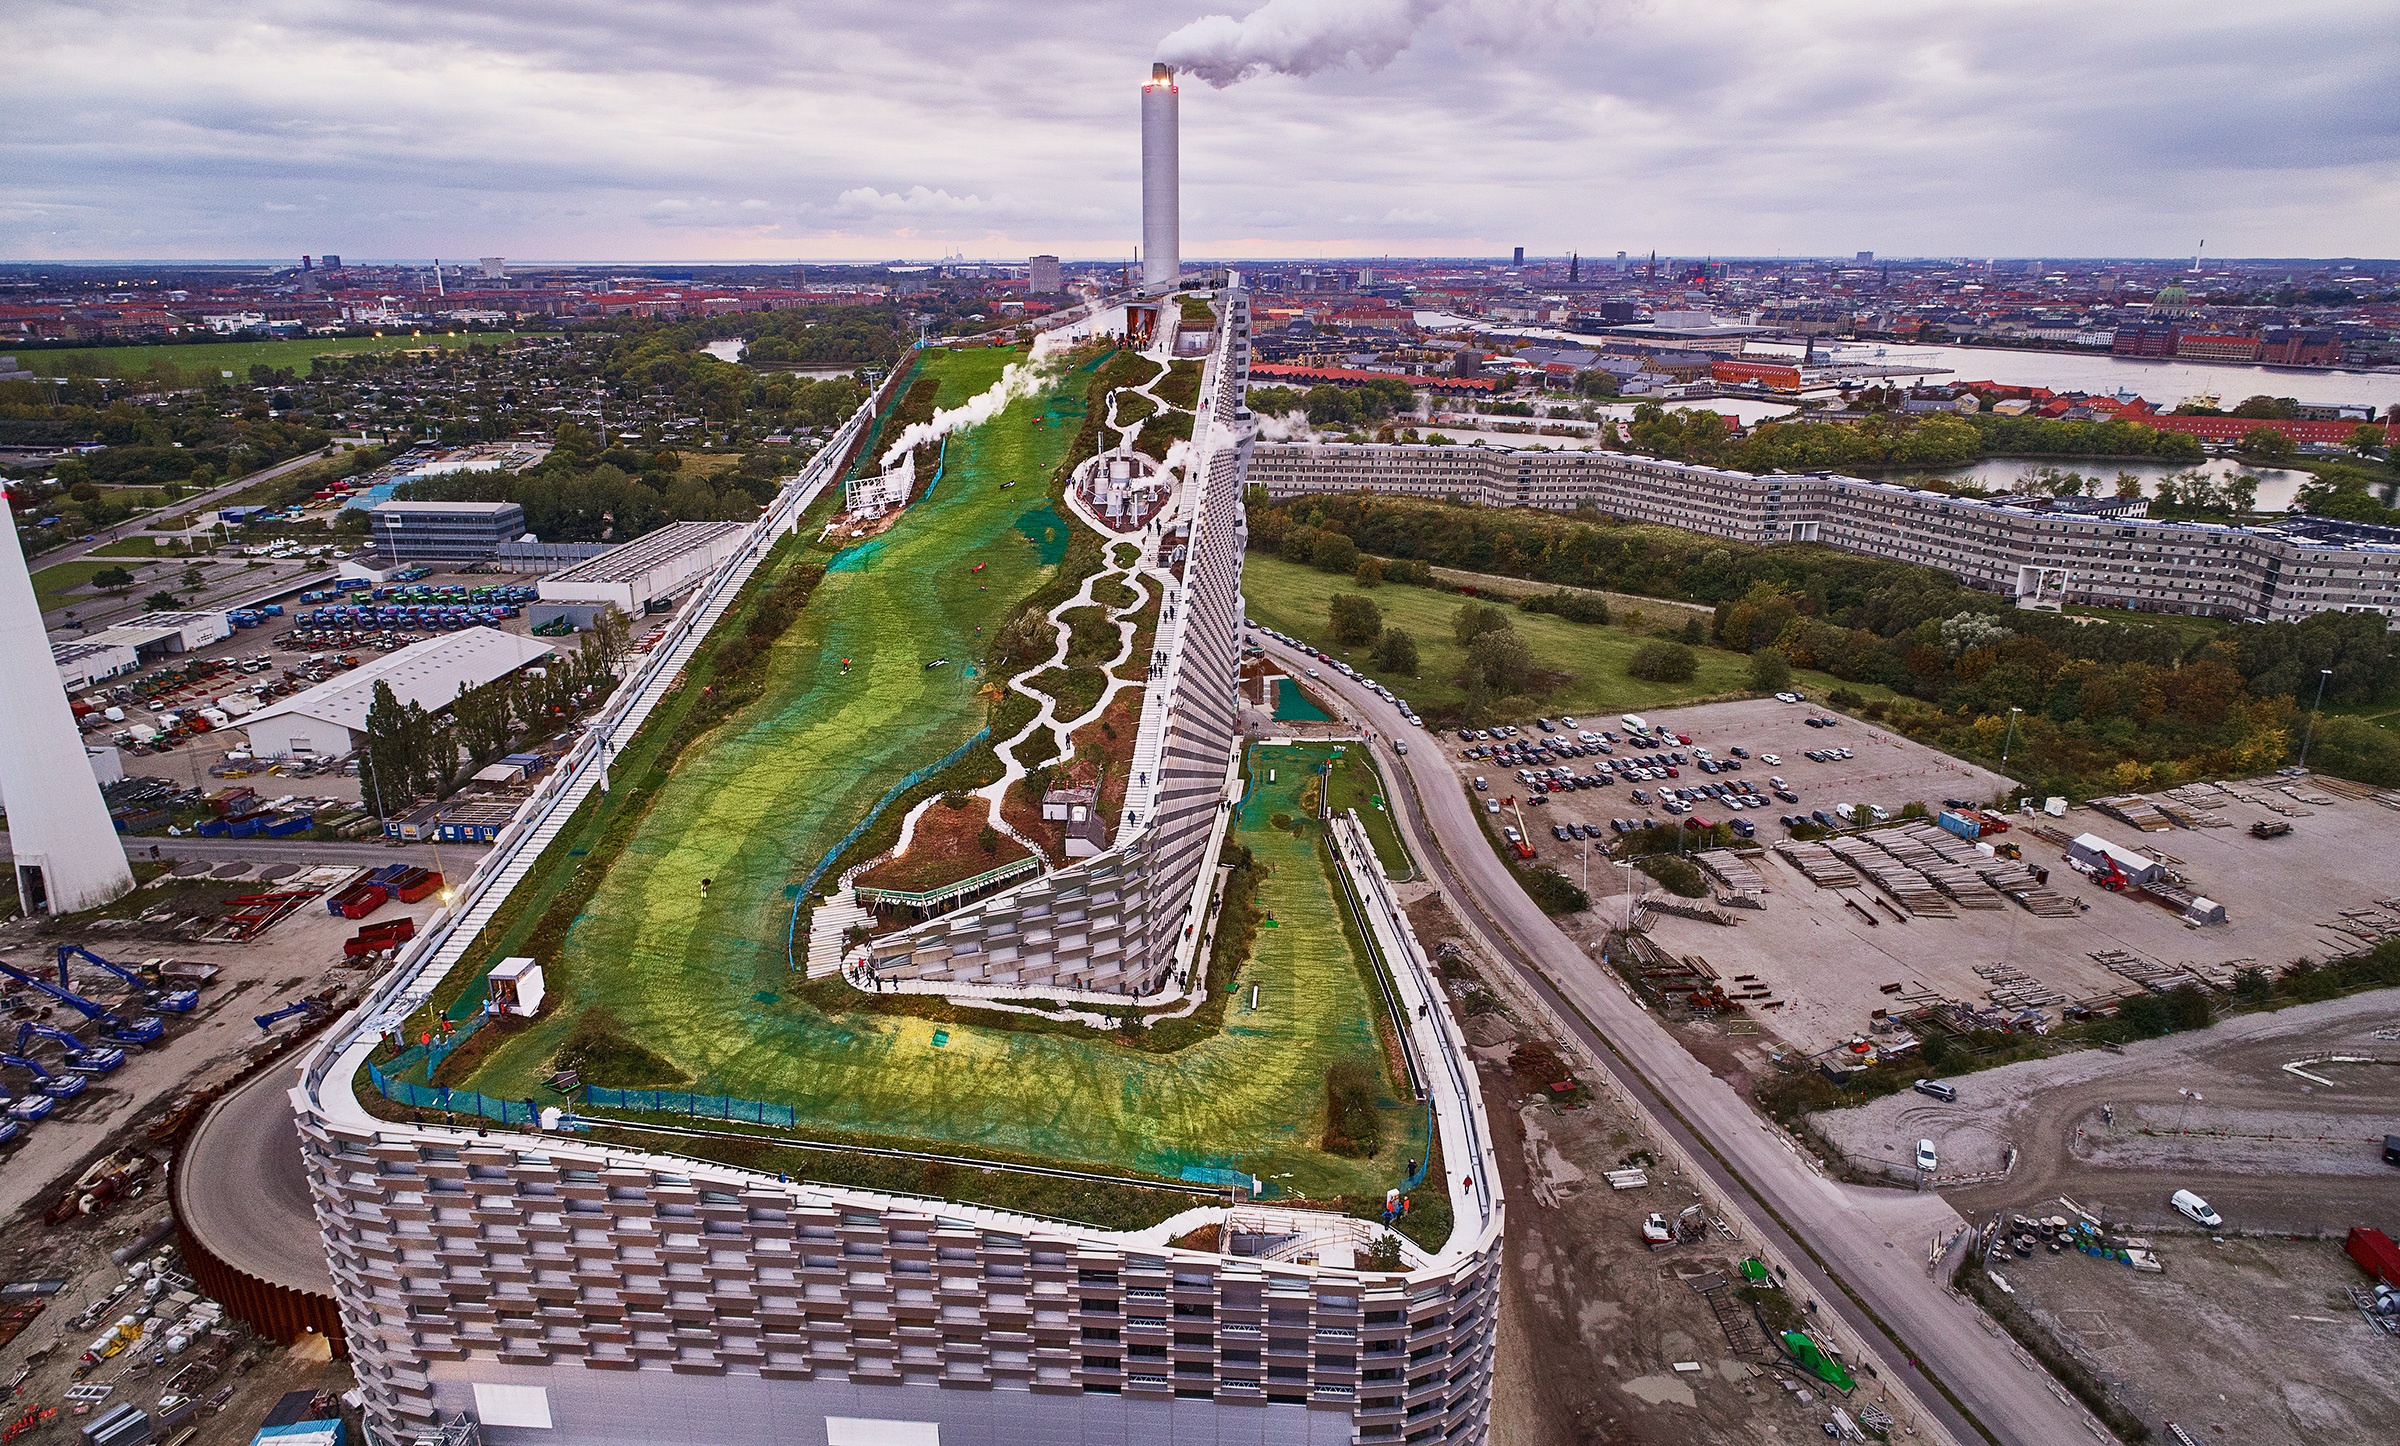 BIG's ski slope on top of a power plant, opened to the public in Copenhagen in October 2019, embodies Ingels' ethos of "hedonistic sustainability." (Luca Locatelli—INSTITUTE)